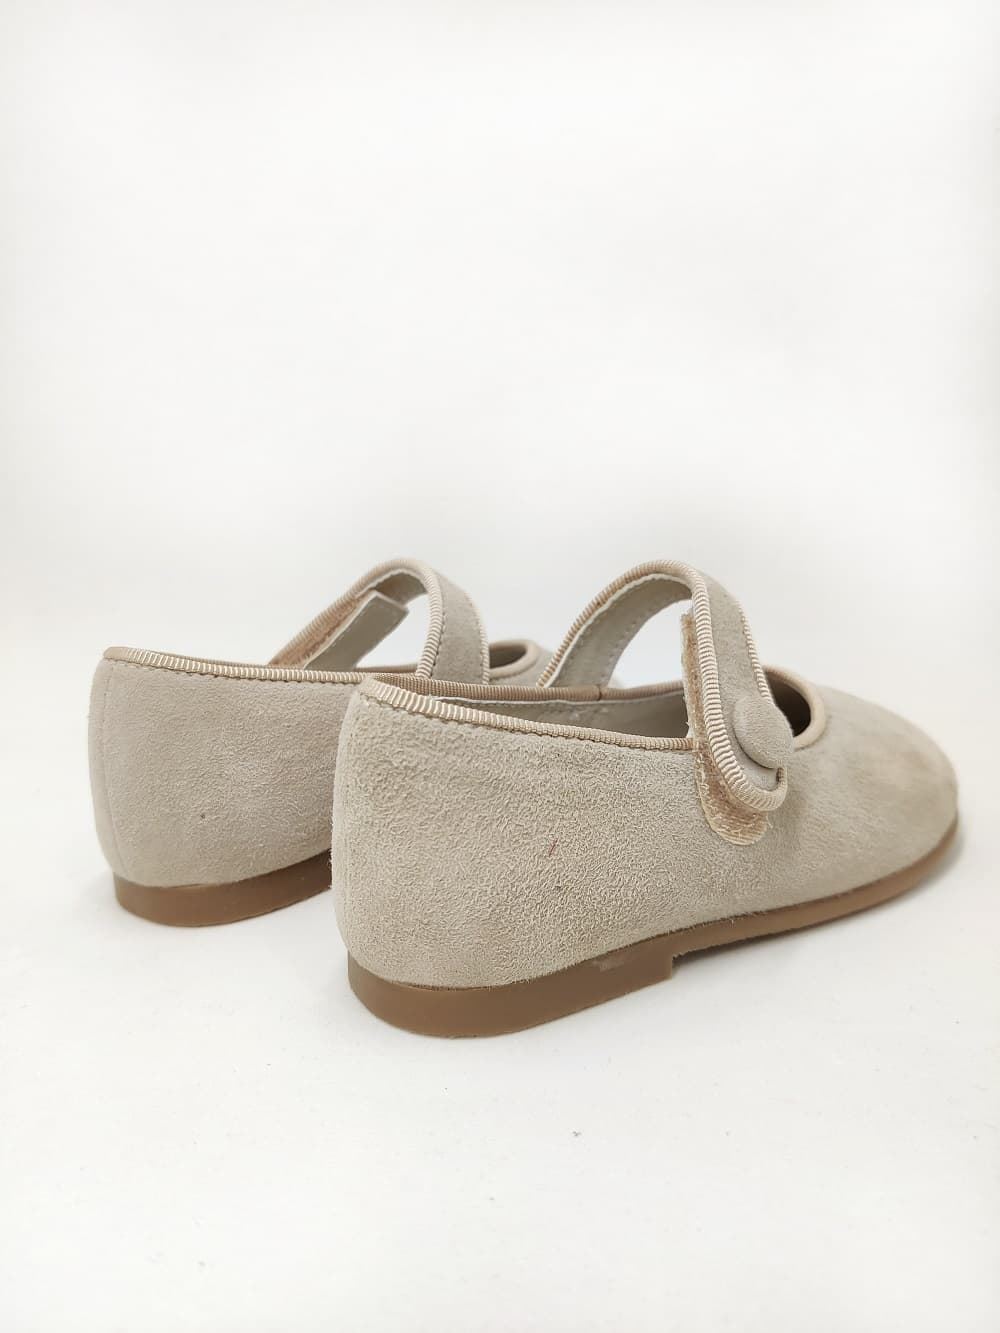 Pirufin (Piruflex) Mary Janes for baby girls in Taupe suede - Image 4